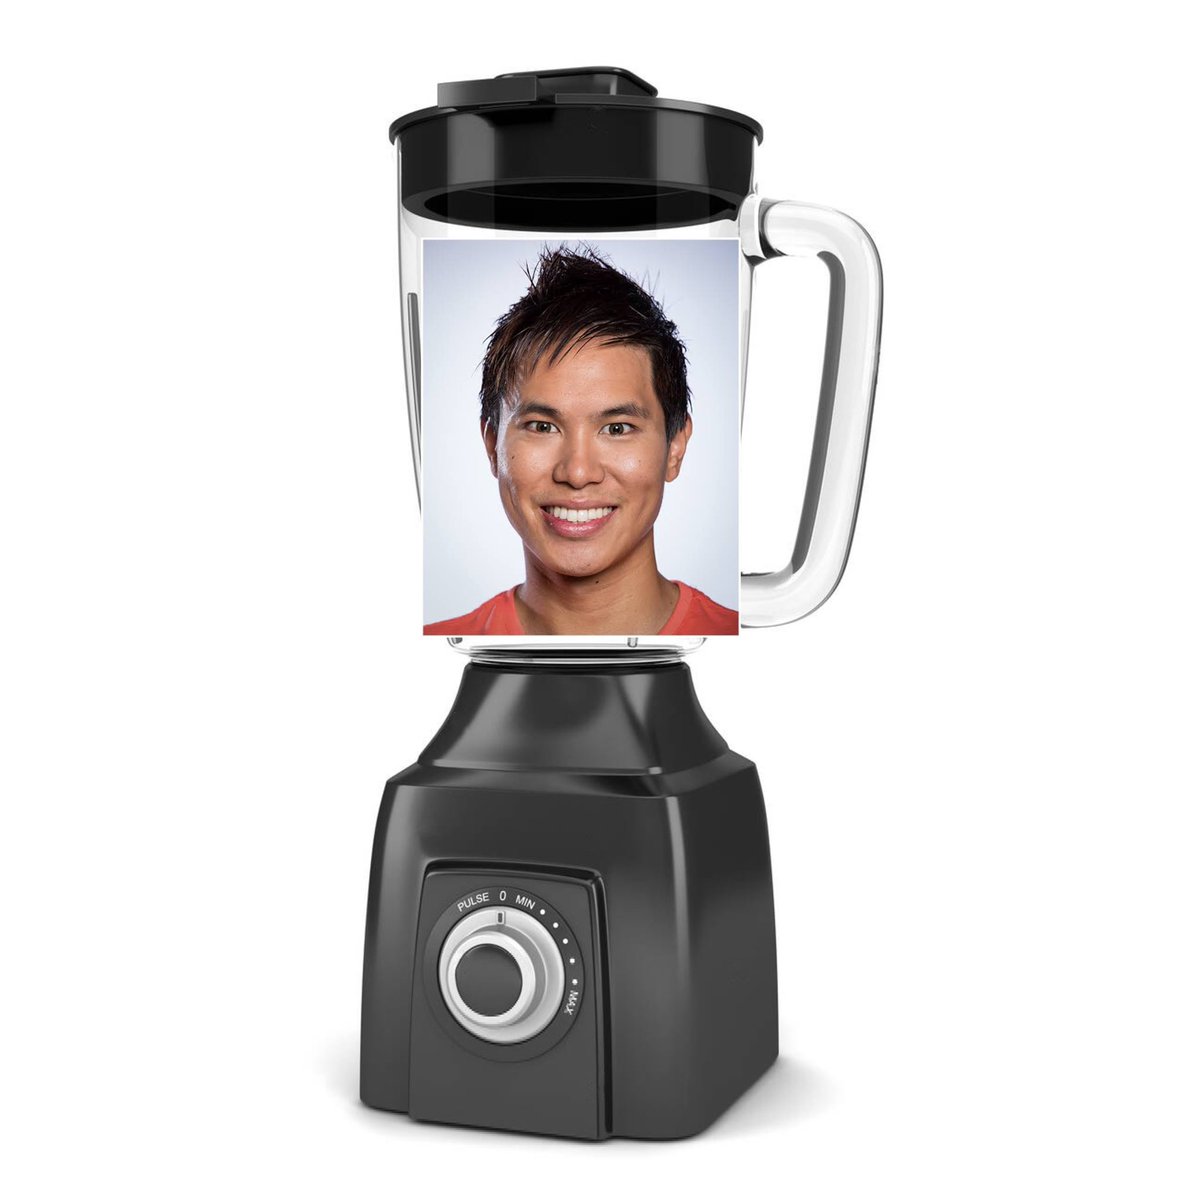 andy trieu from australian tv show sbs popasia is in the blender